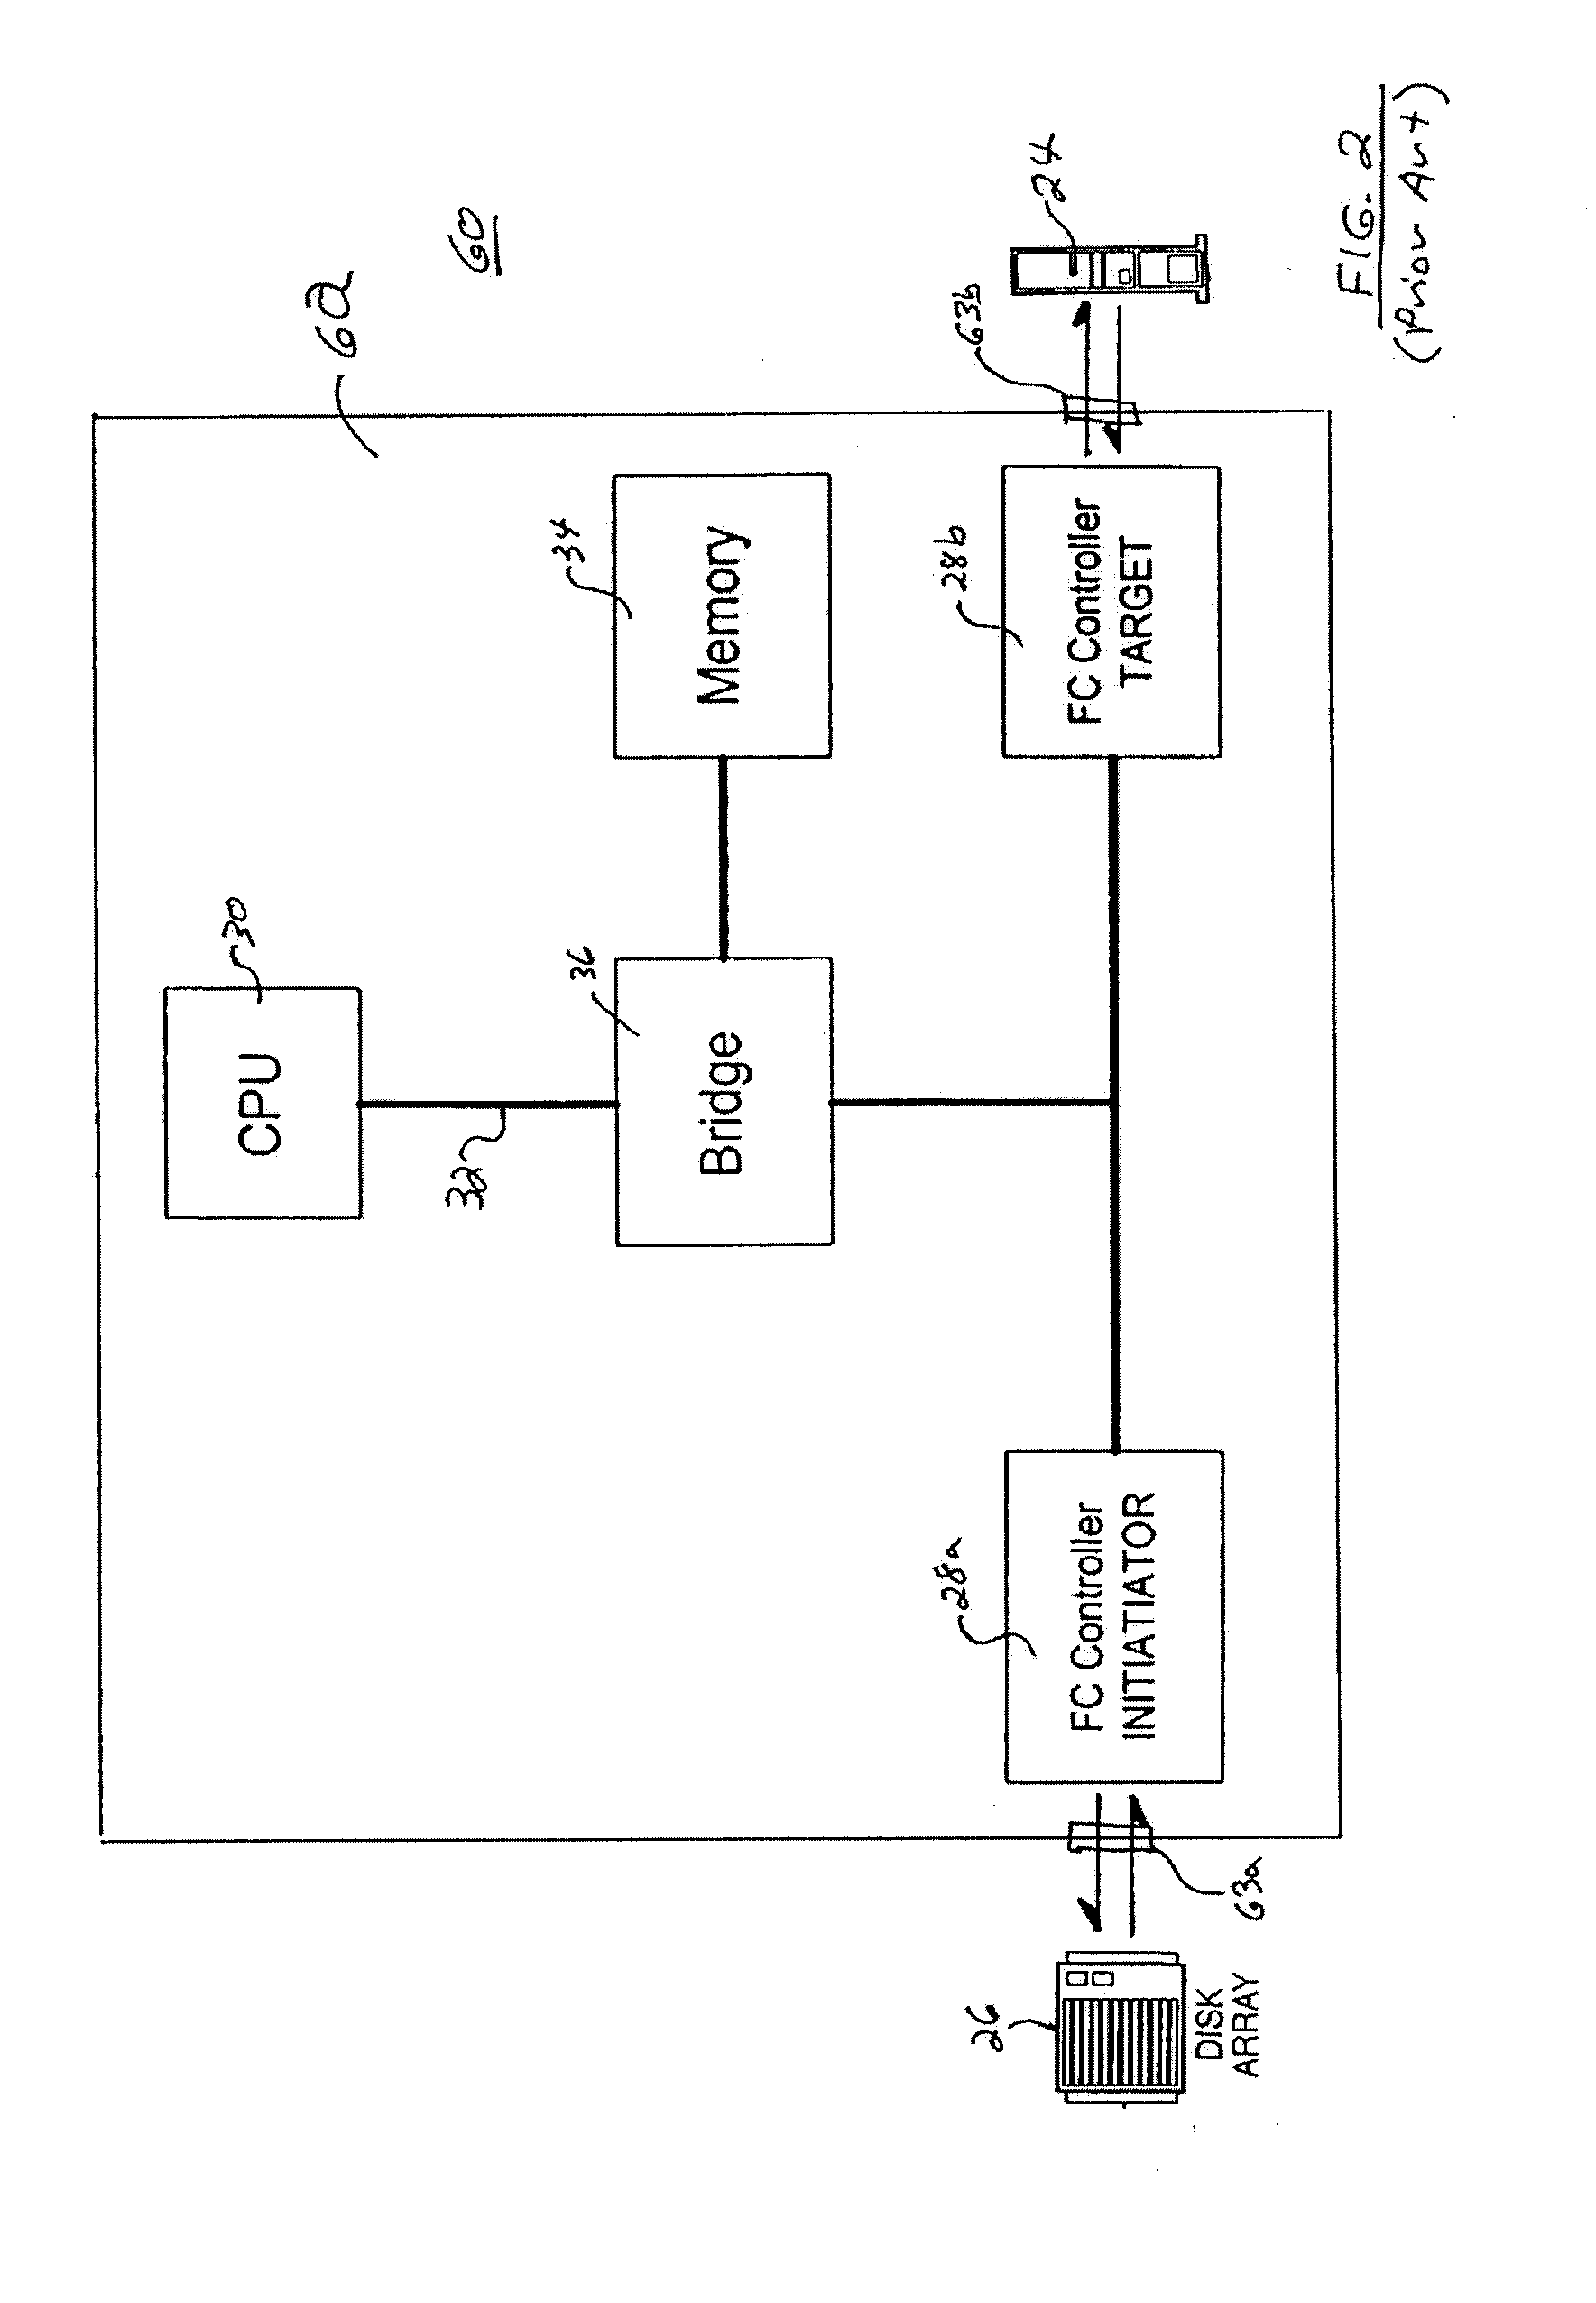 Method and apparatus for transferring information between different streaming protocols at wire speed